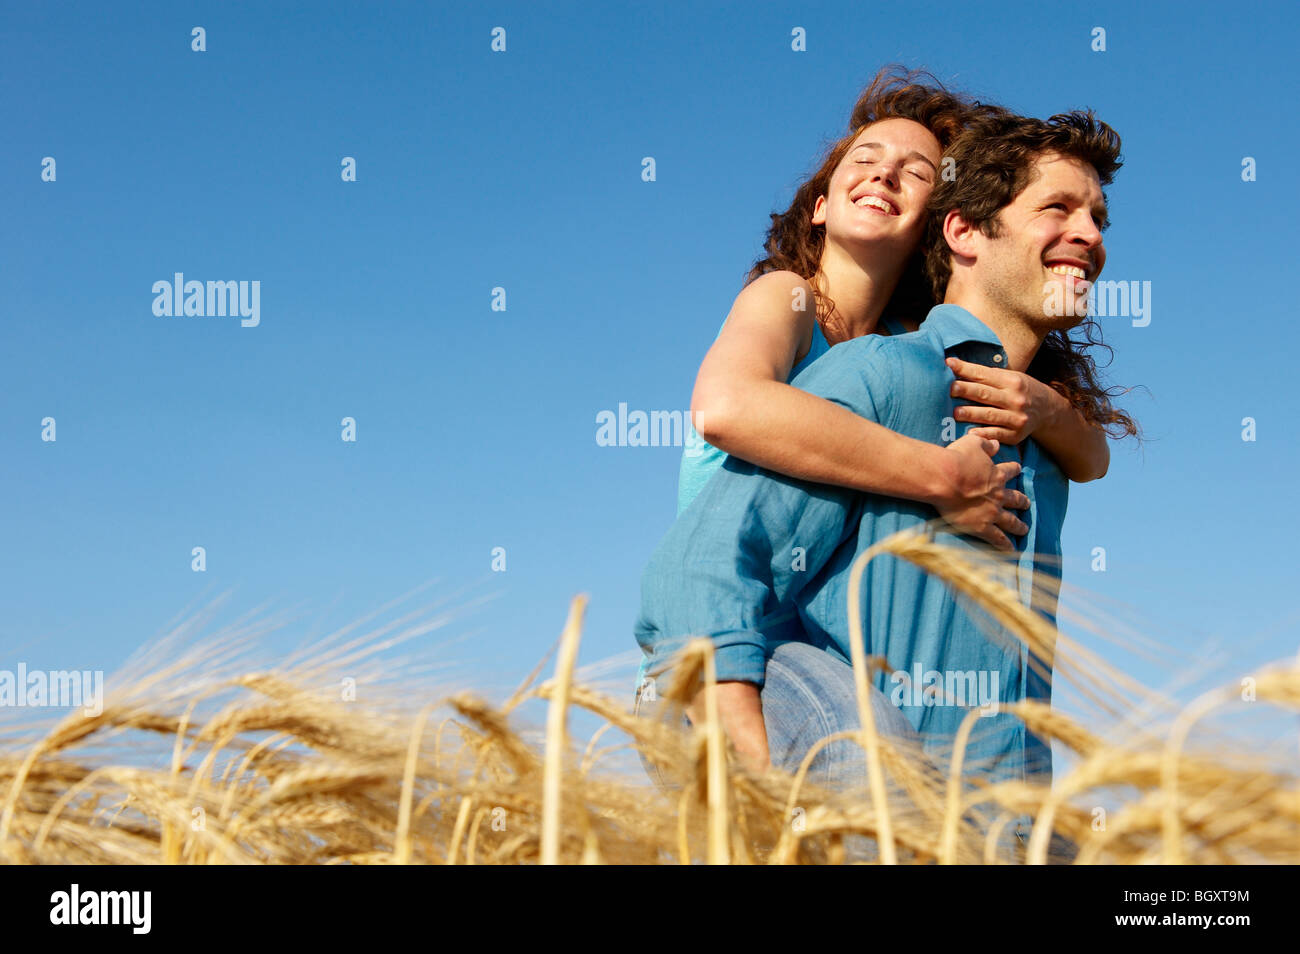 Man carrying woman in a wheat field Stock Photo